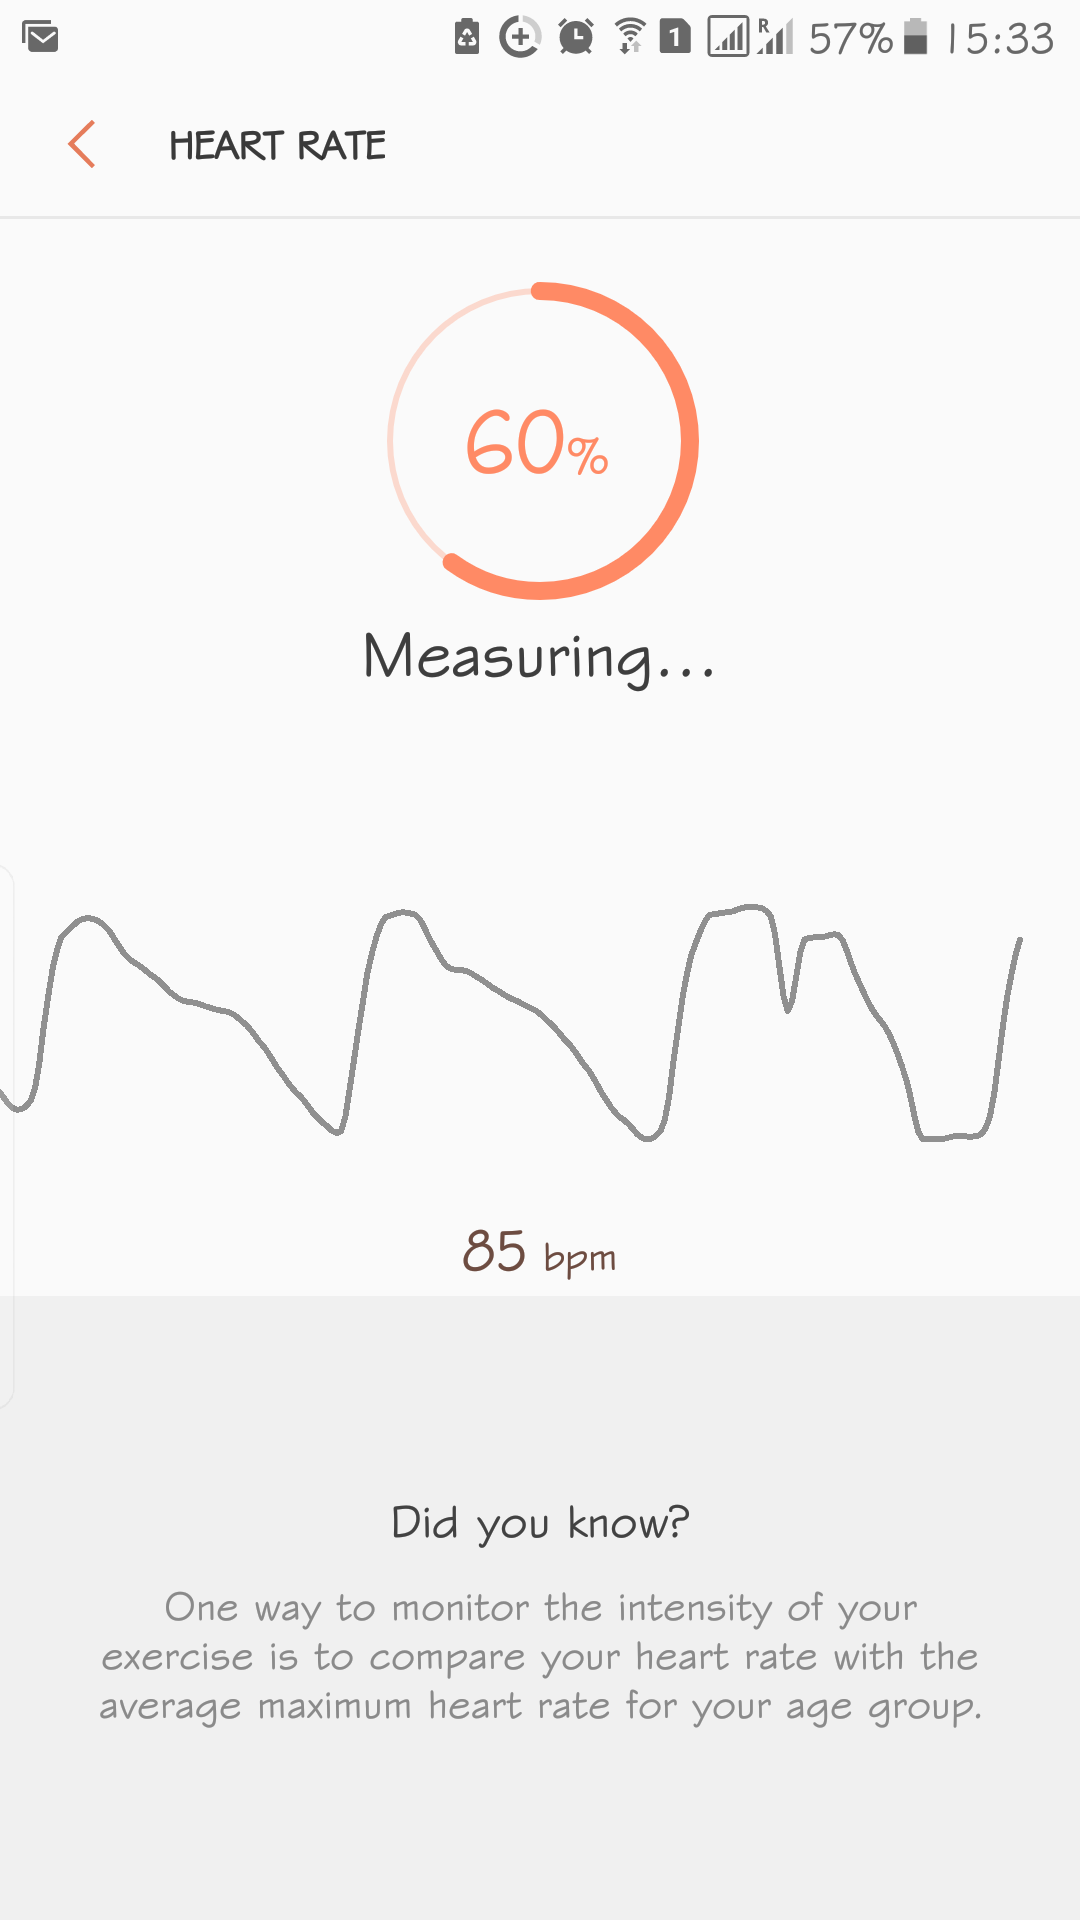 Heart rate monitor won't finish. | Android Central